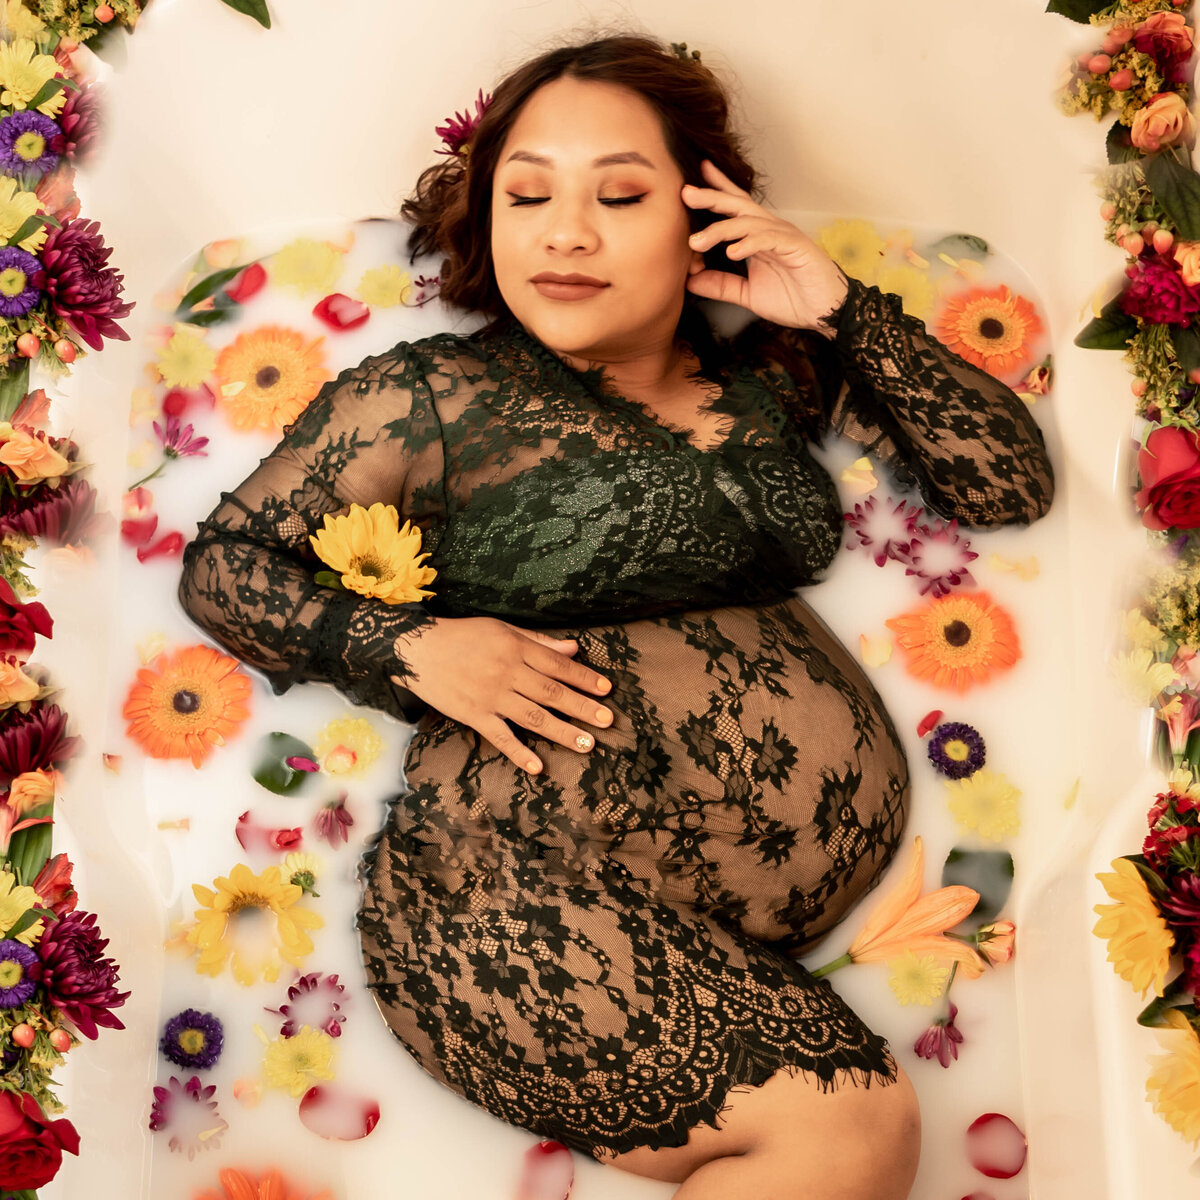 Mother to be takes a moment to relax in a floral milk bath